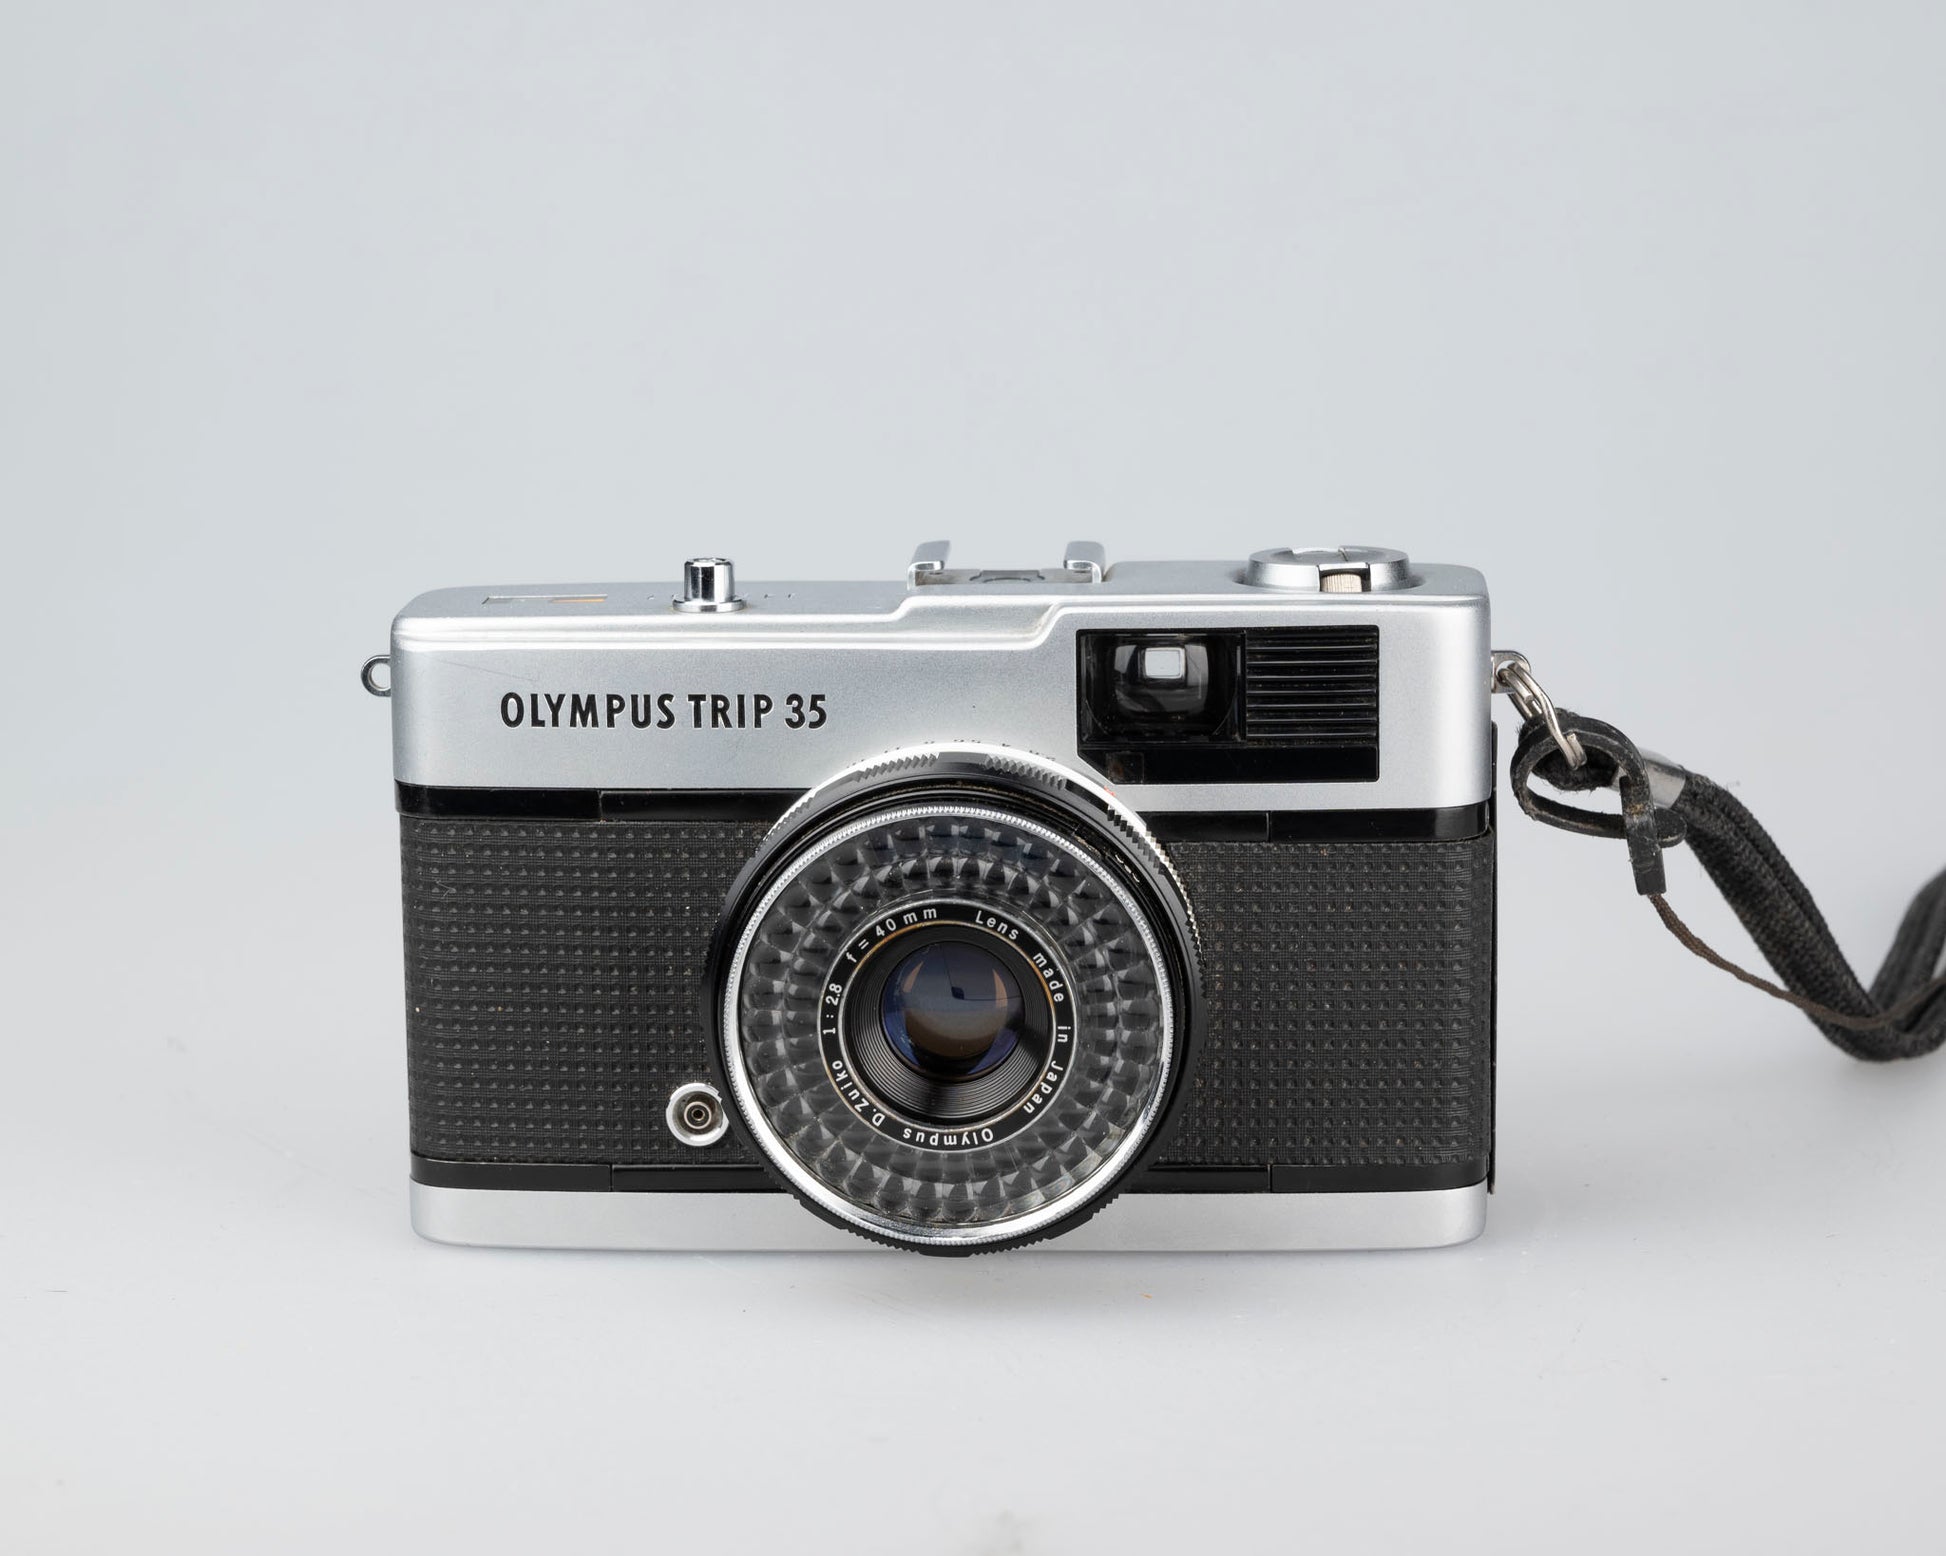 This film-tested Olympus Trip 35 is available for sale at www.newwavepool.shop